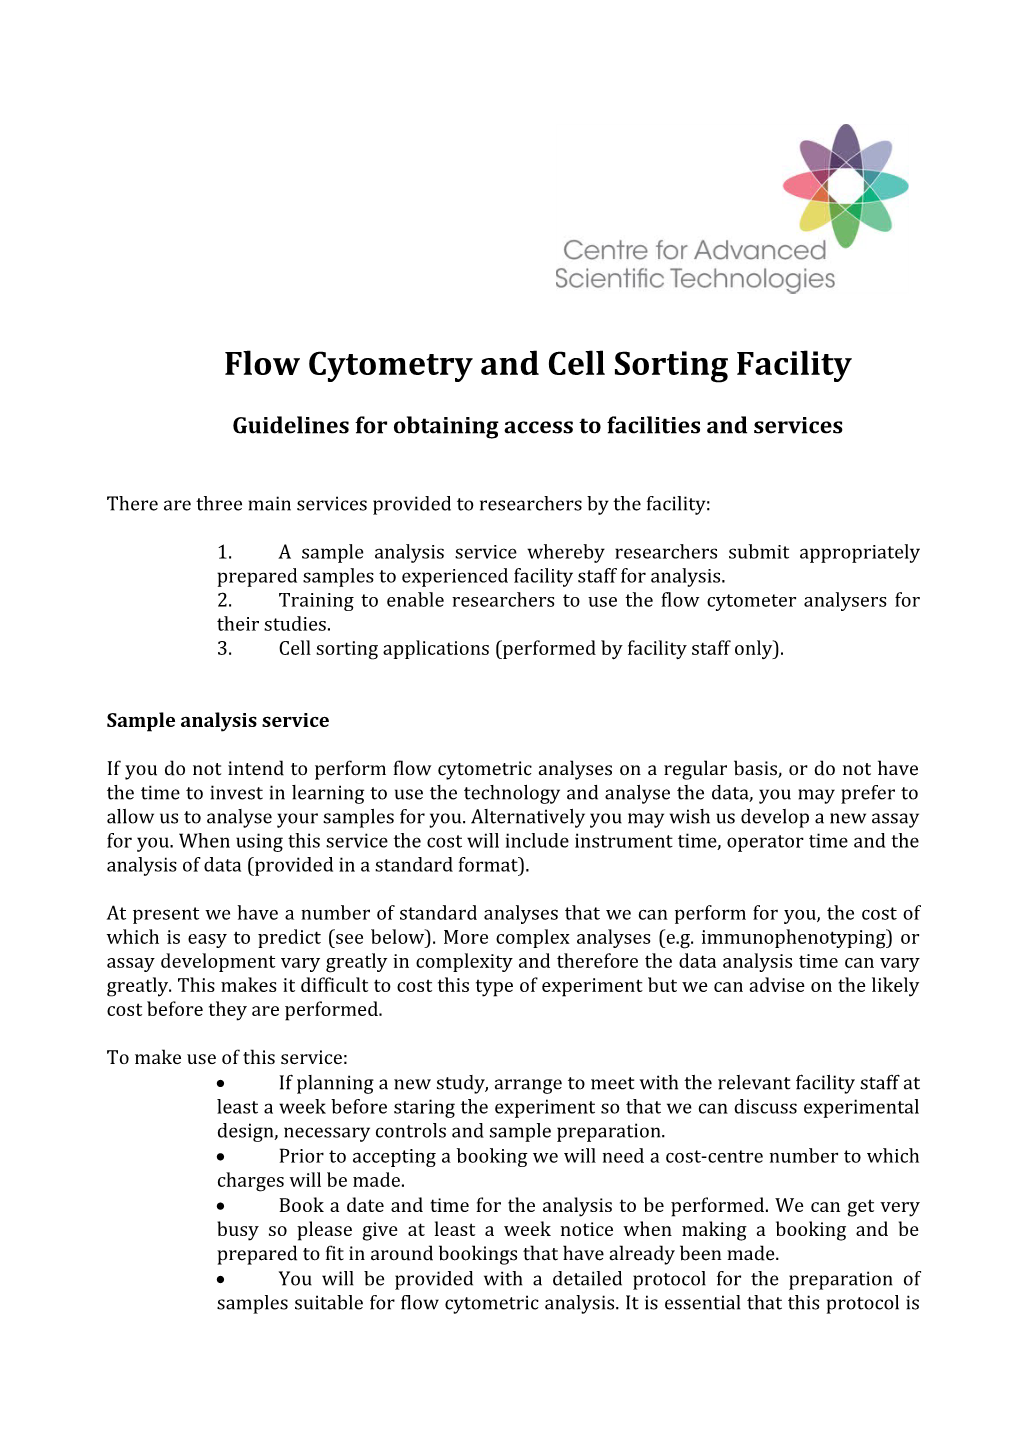 Flow Cytometry and Cell Sorting Facility